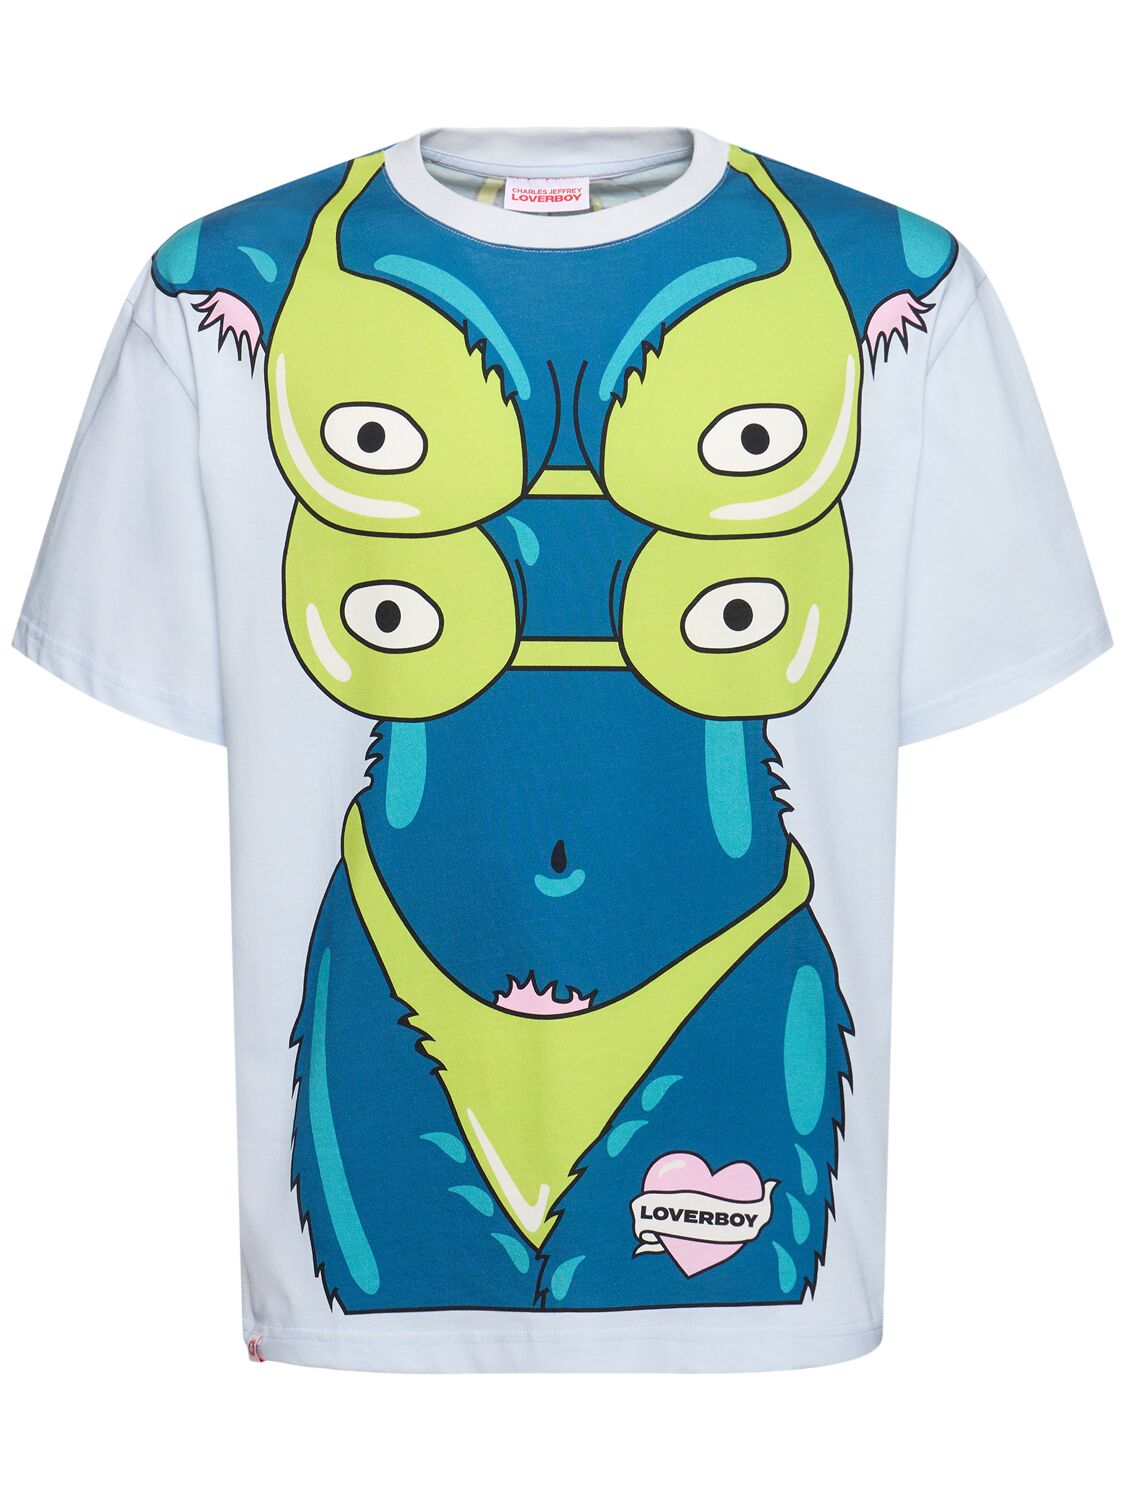 Charles Jeffrey Loverboy Printed Cotton Jersey T-shirt In Blue